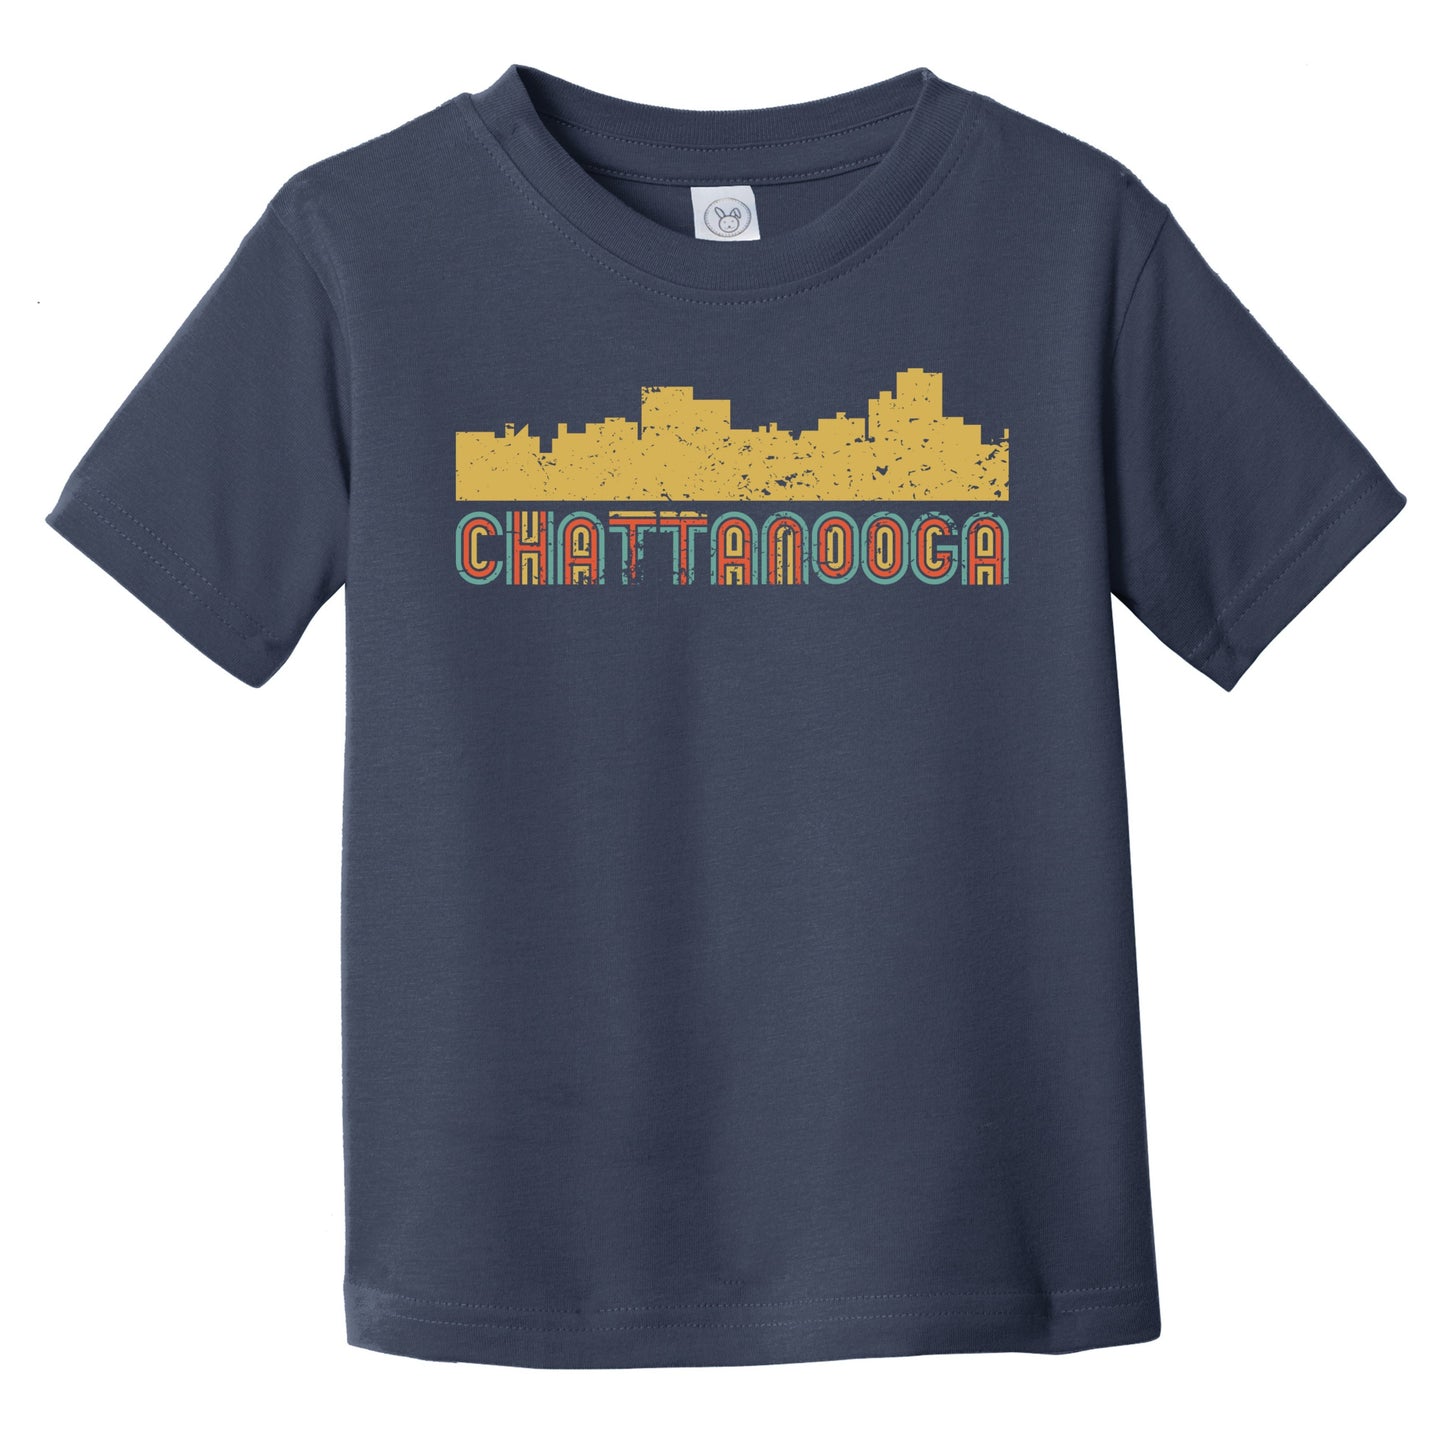 Retro Chattanooga Tennessee Skyline Infant / Toddler T-Shirt